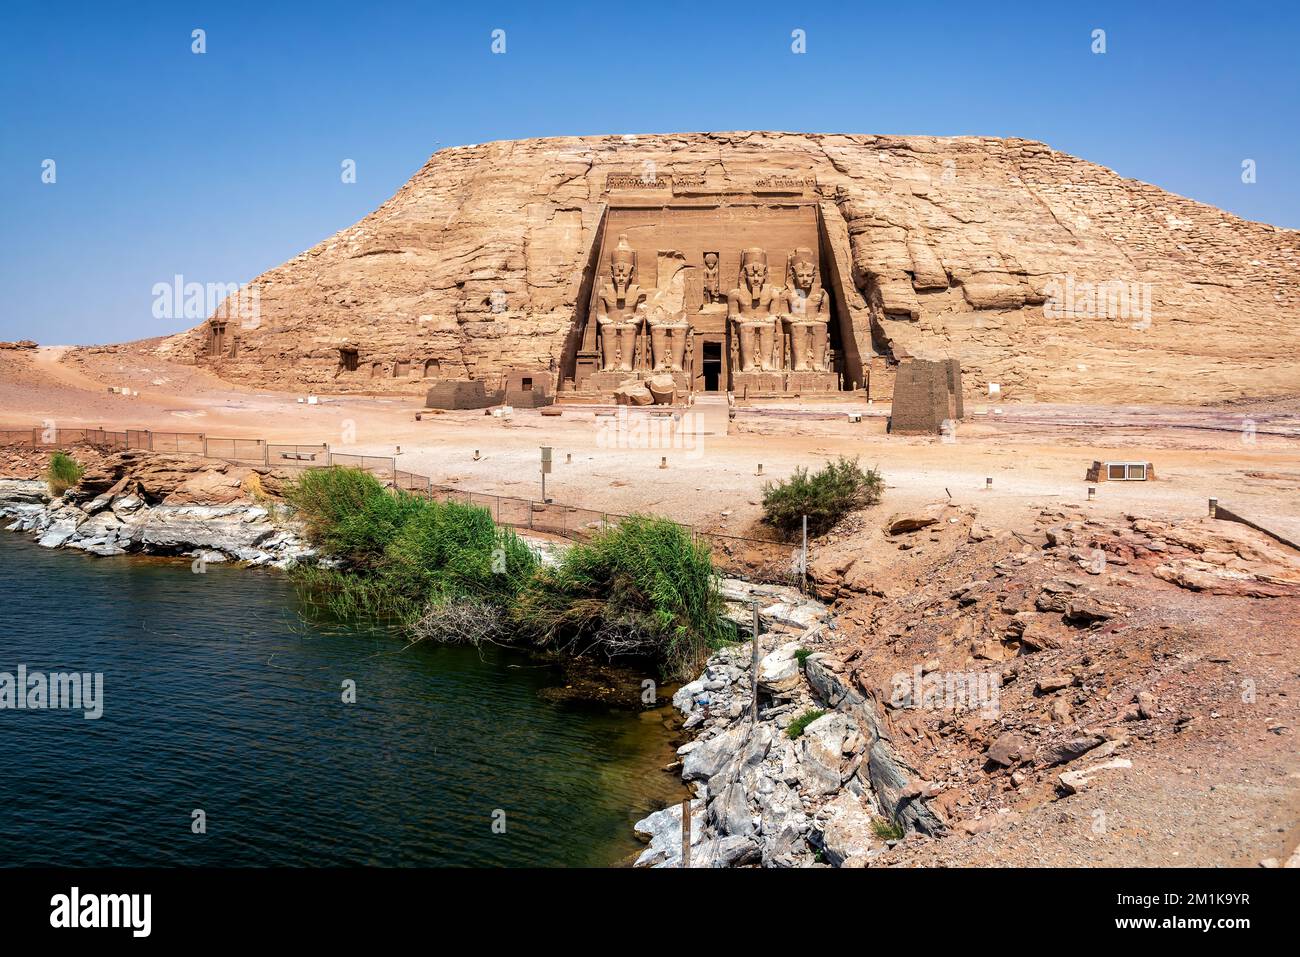 View of Abu Simbel Temple and the shore of Lake Nasser in Egypt Stock Photo